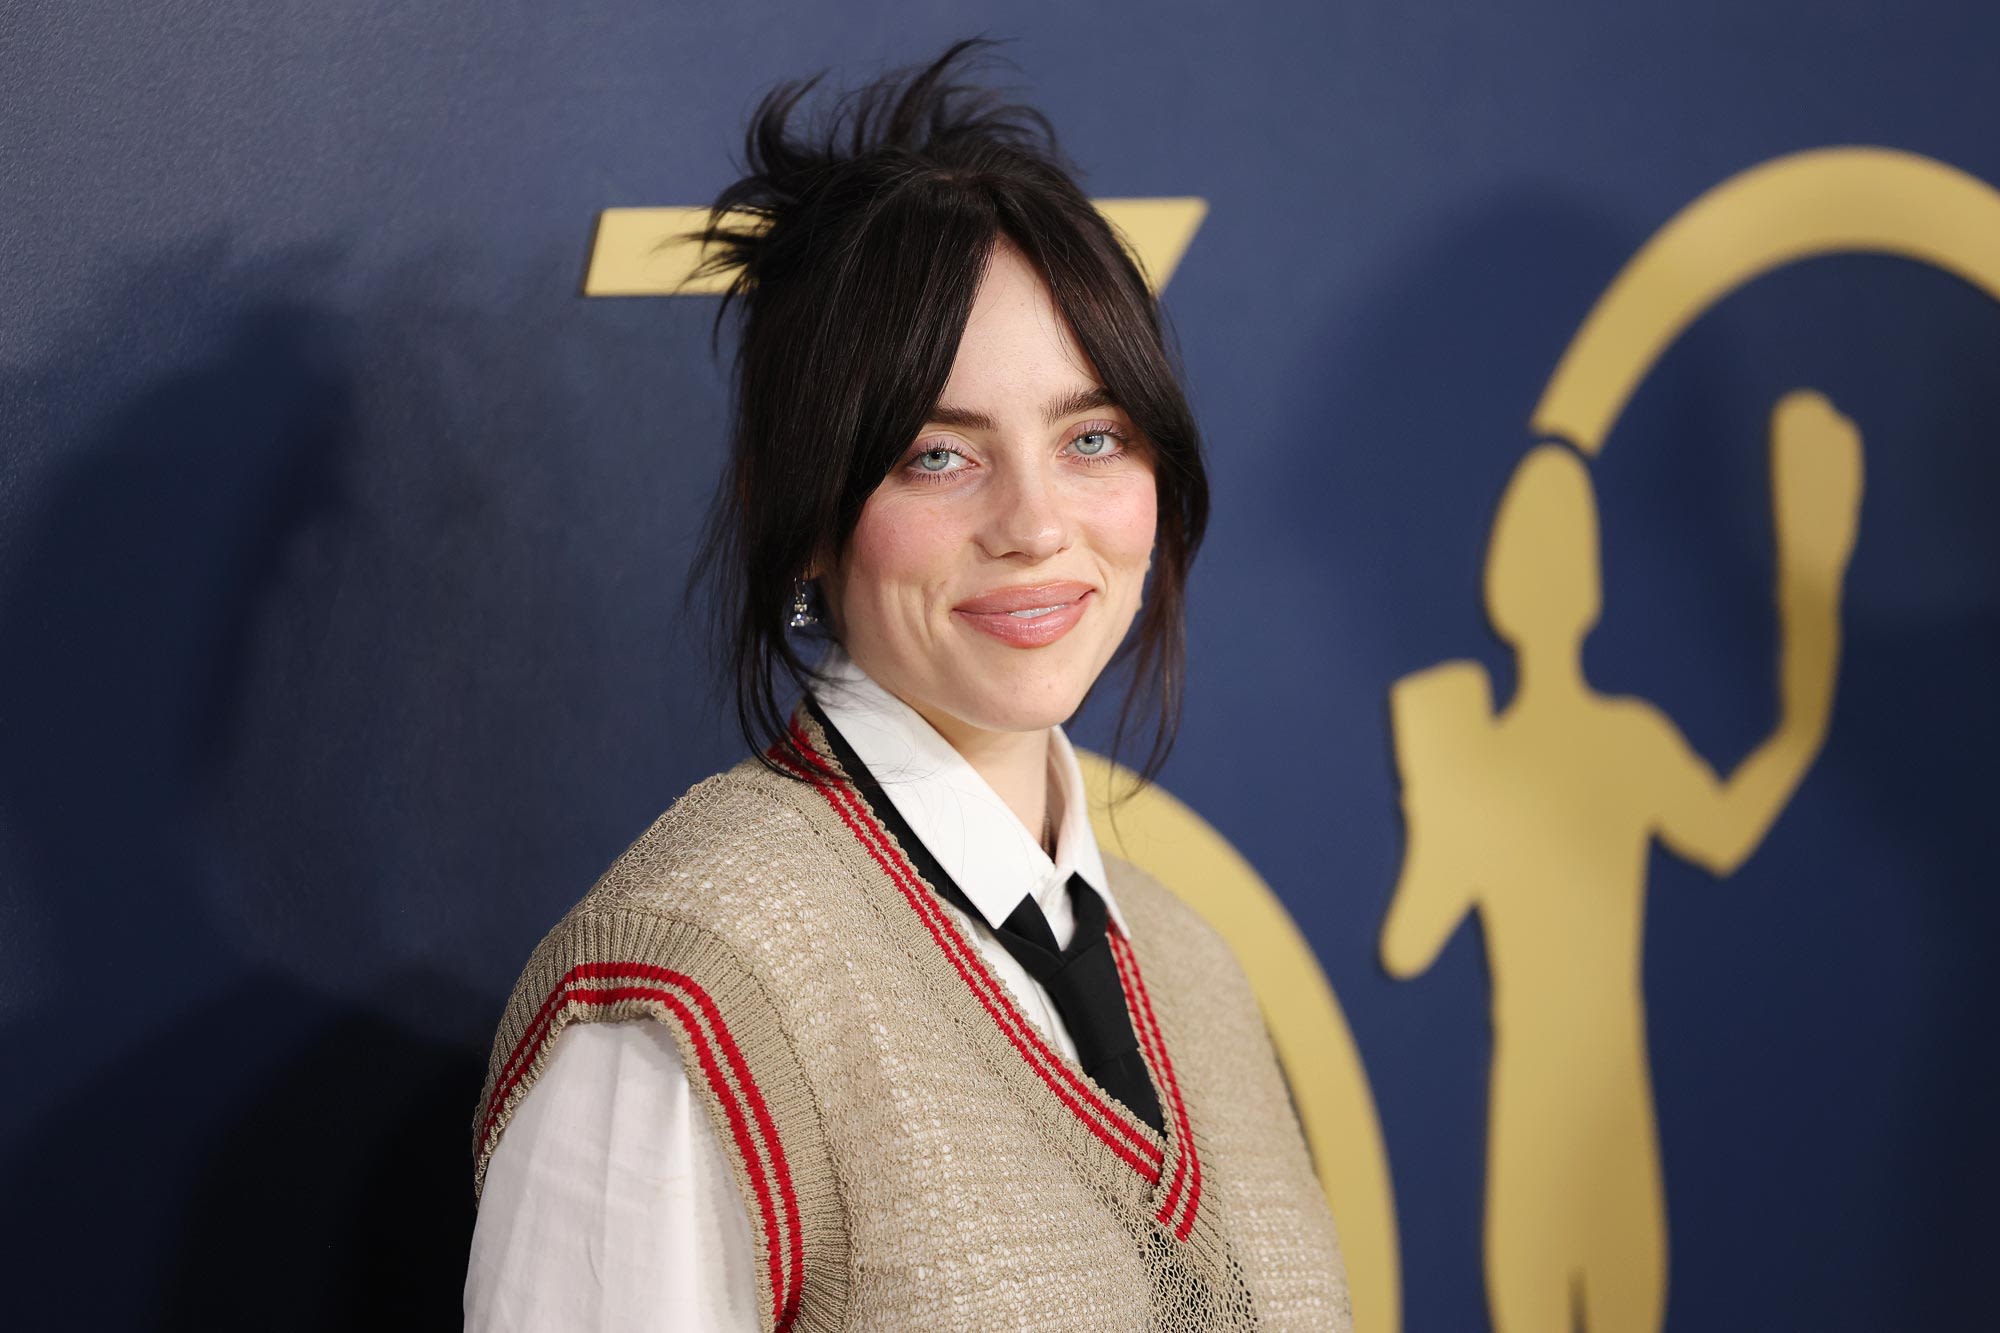 Billie Eilish Sings About Attraction to Women on New Song ‘Lunch’: ‘It’s a Craving Not a Crush’